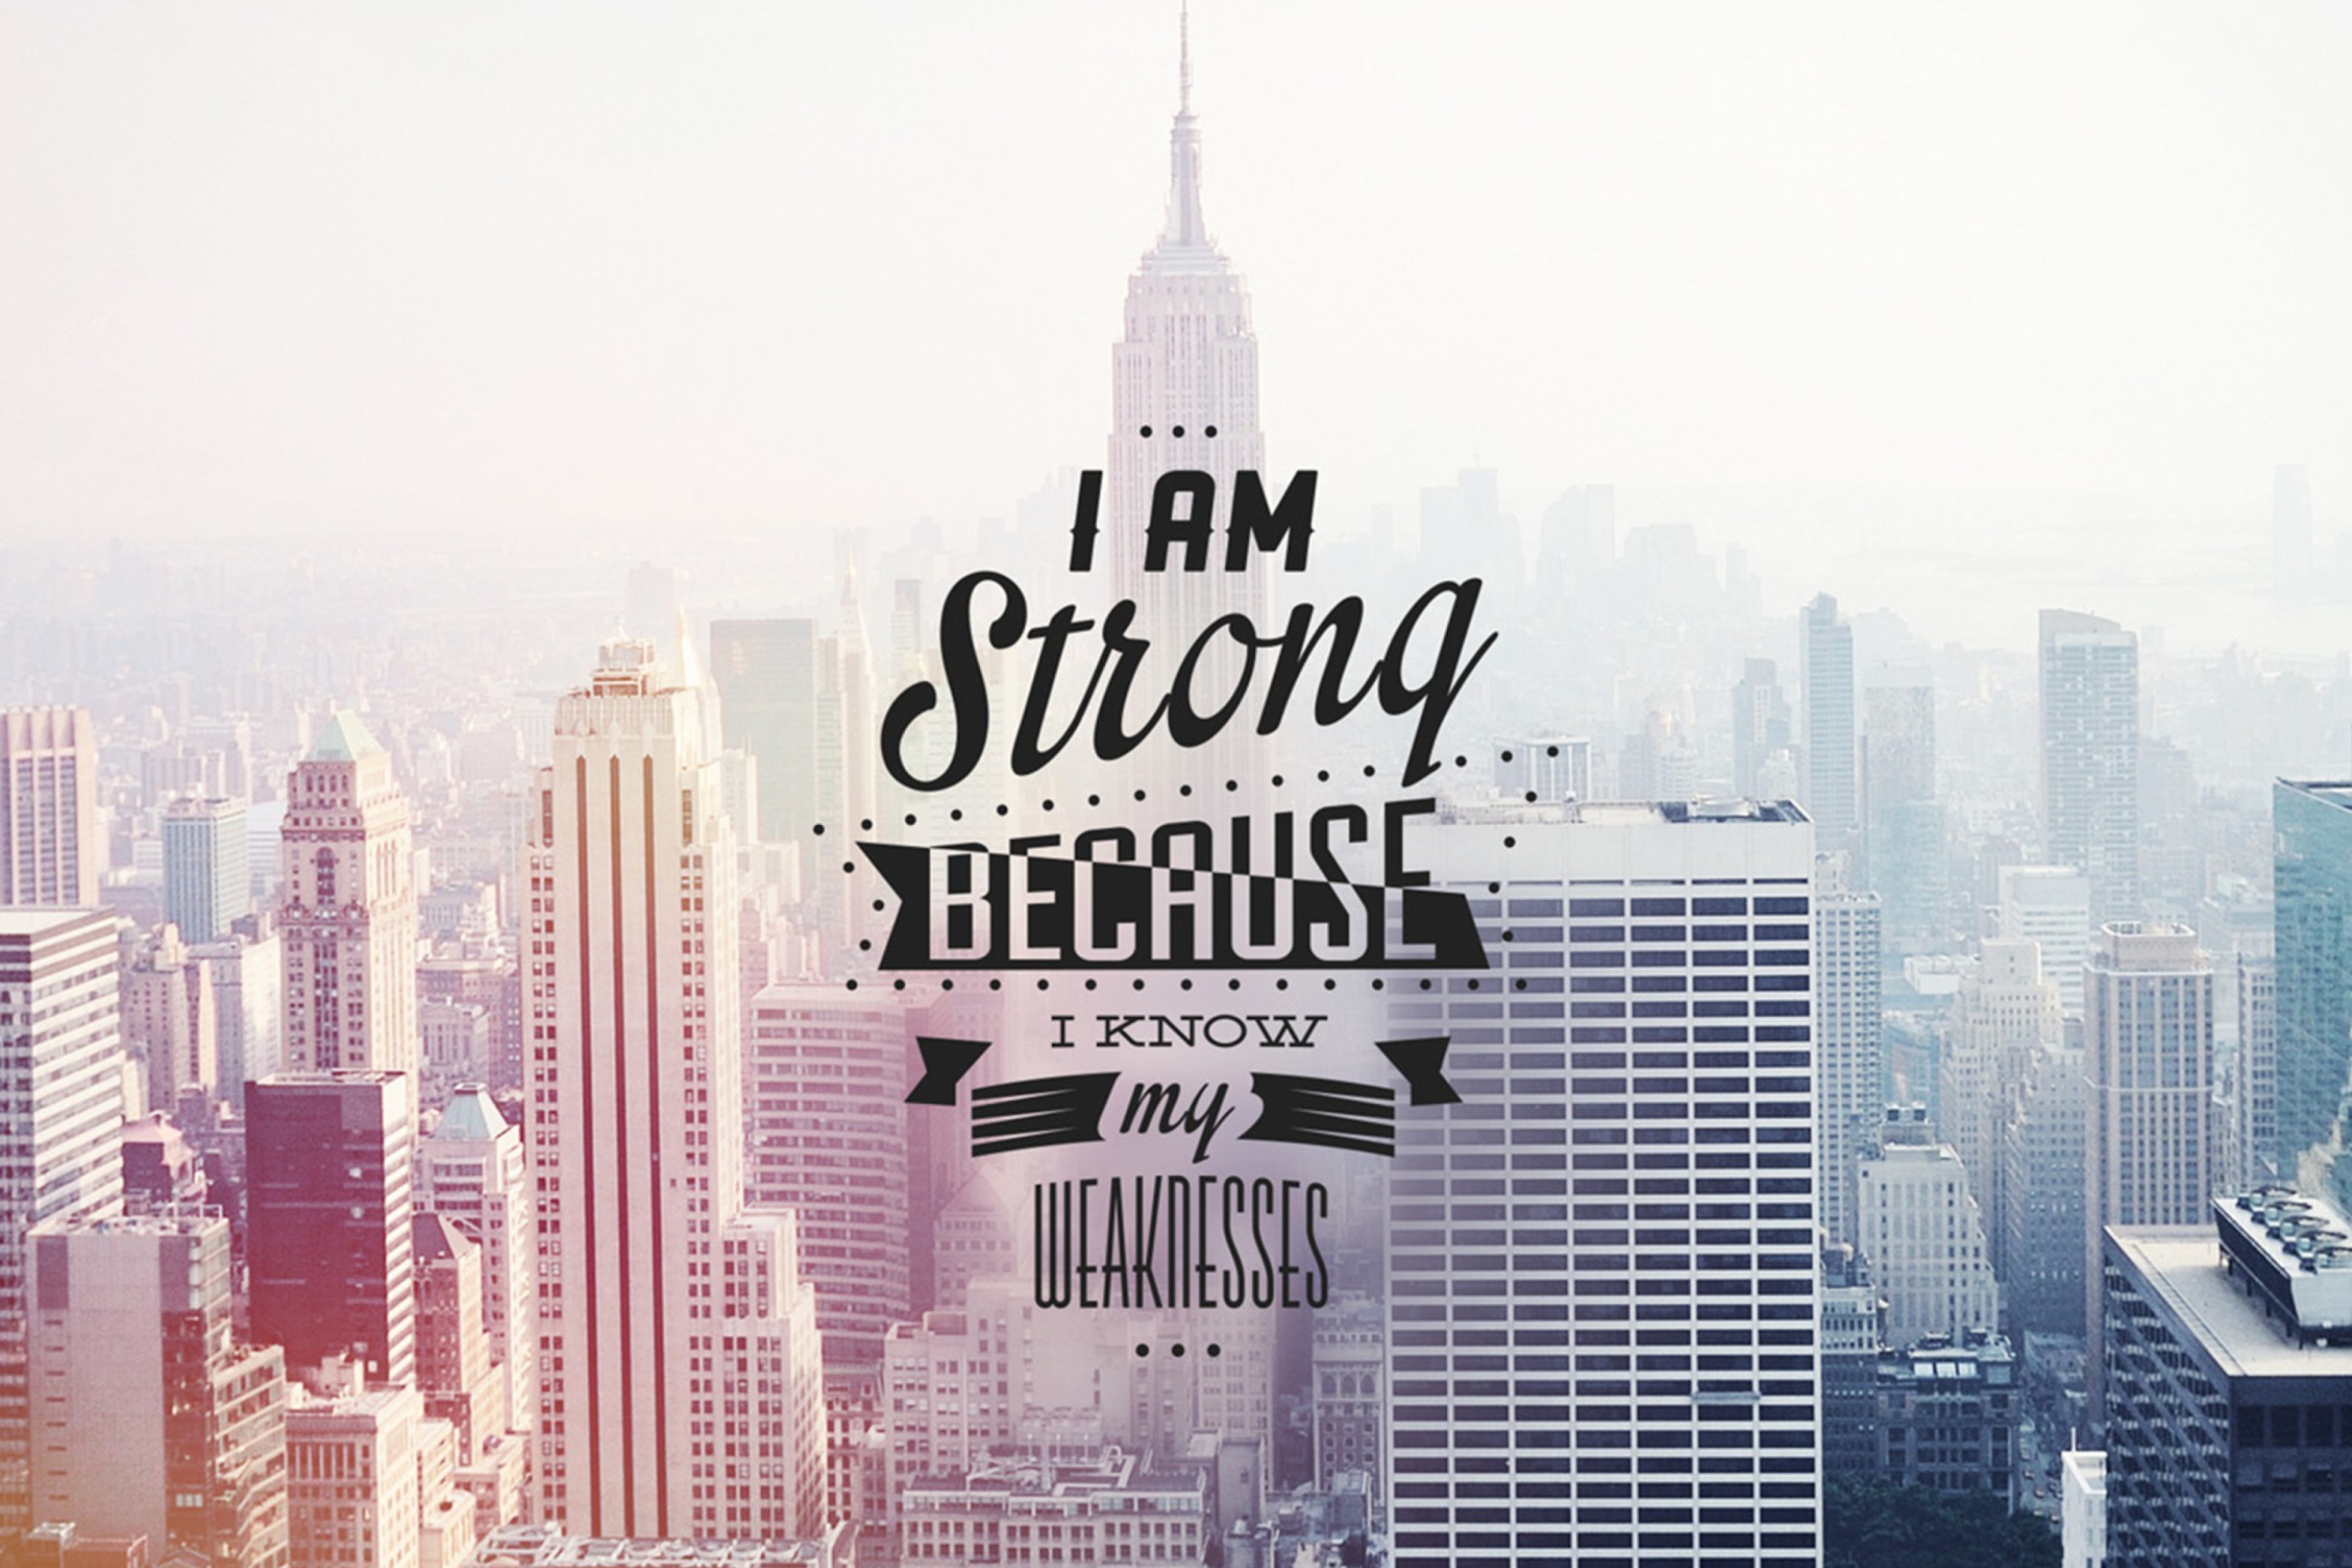 Обои I am strong because i know my weakness 2880x1920